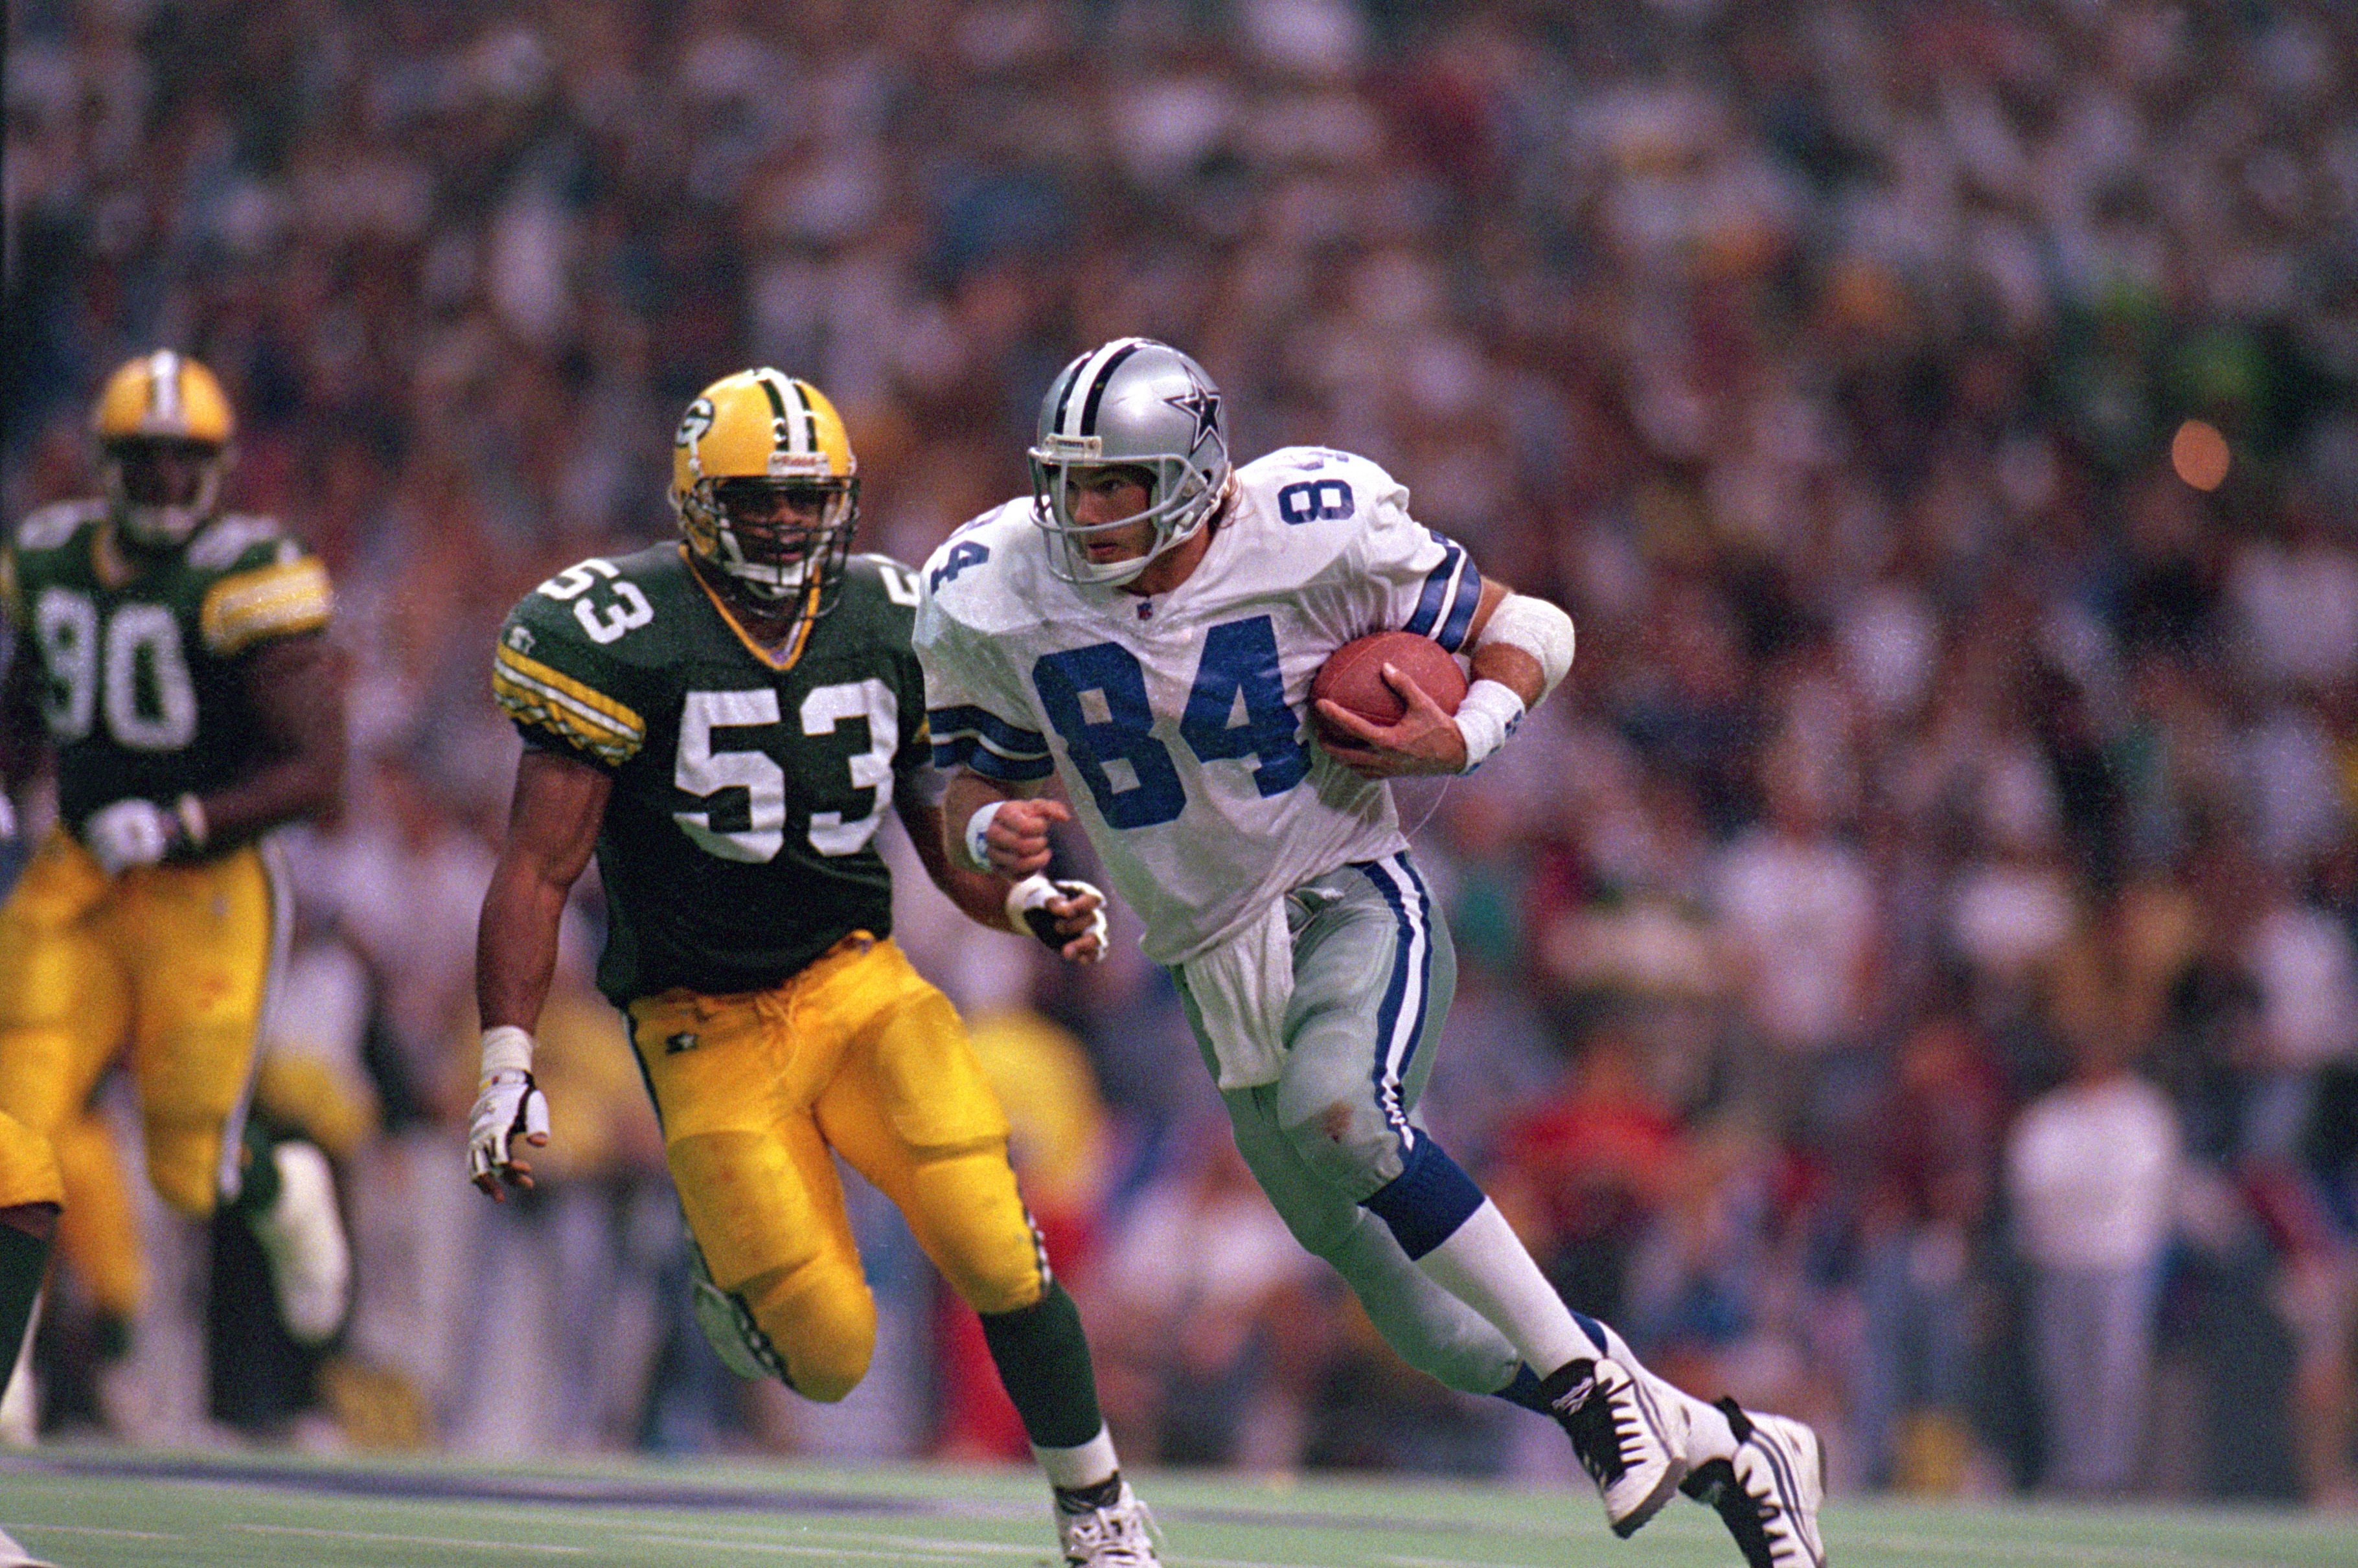 IRVING, TX - JANUARY 14: Jay Novacek #84 of the Dallas Cowboys carries the ball during a game against the Green Bay Packers at Texas Stadium on January 14, 1996 in Irving, Texas. The Cowboys won 38-27 . (Photo by: Al Bello/Getty Images)